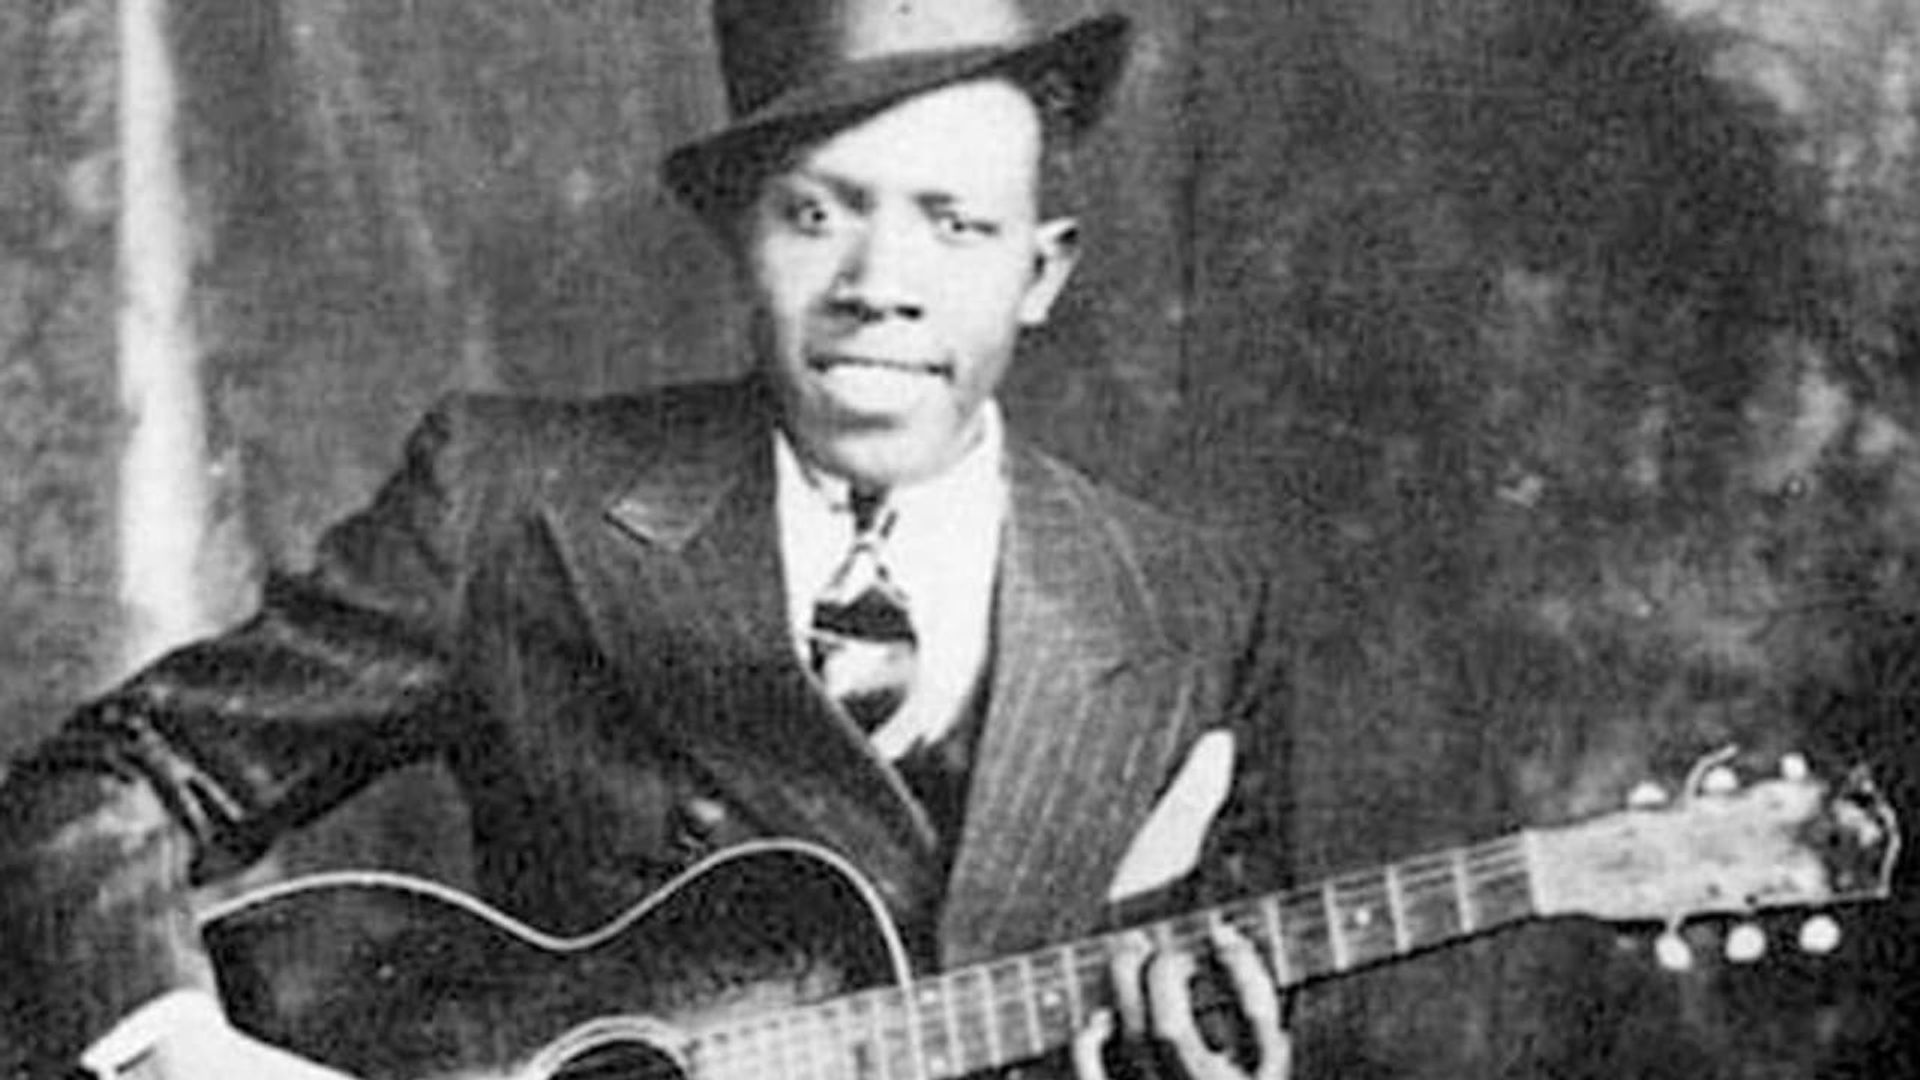 The Search for Robert Johnson background